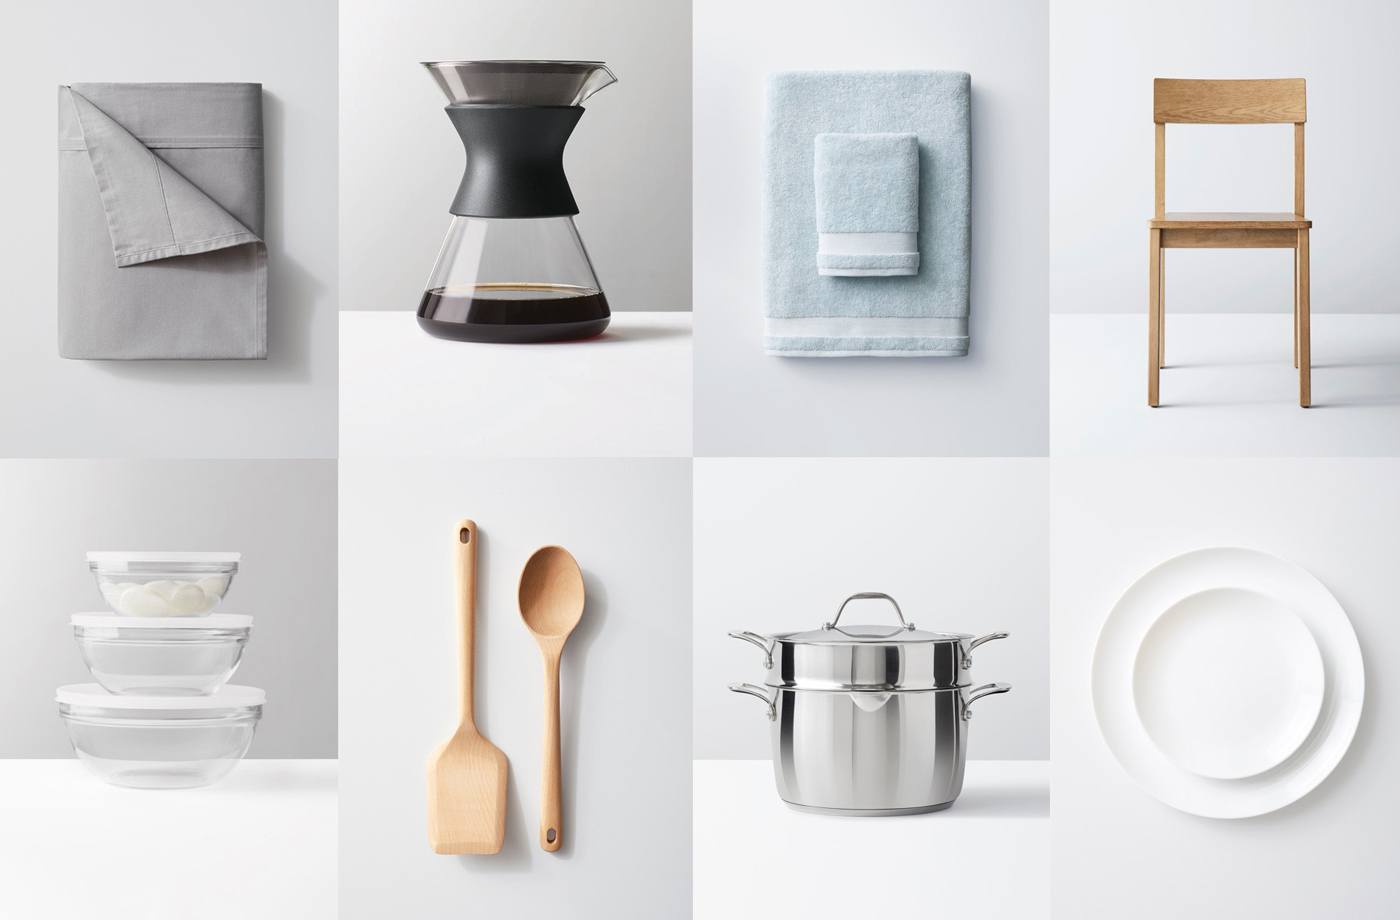 Target to launch home brand Made by Design